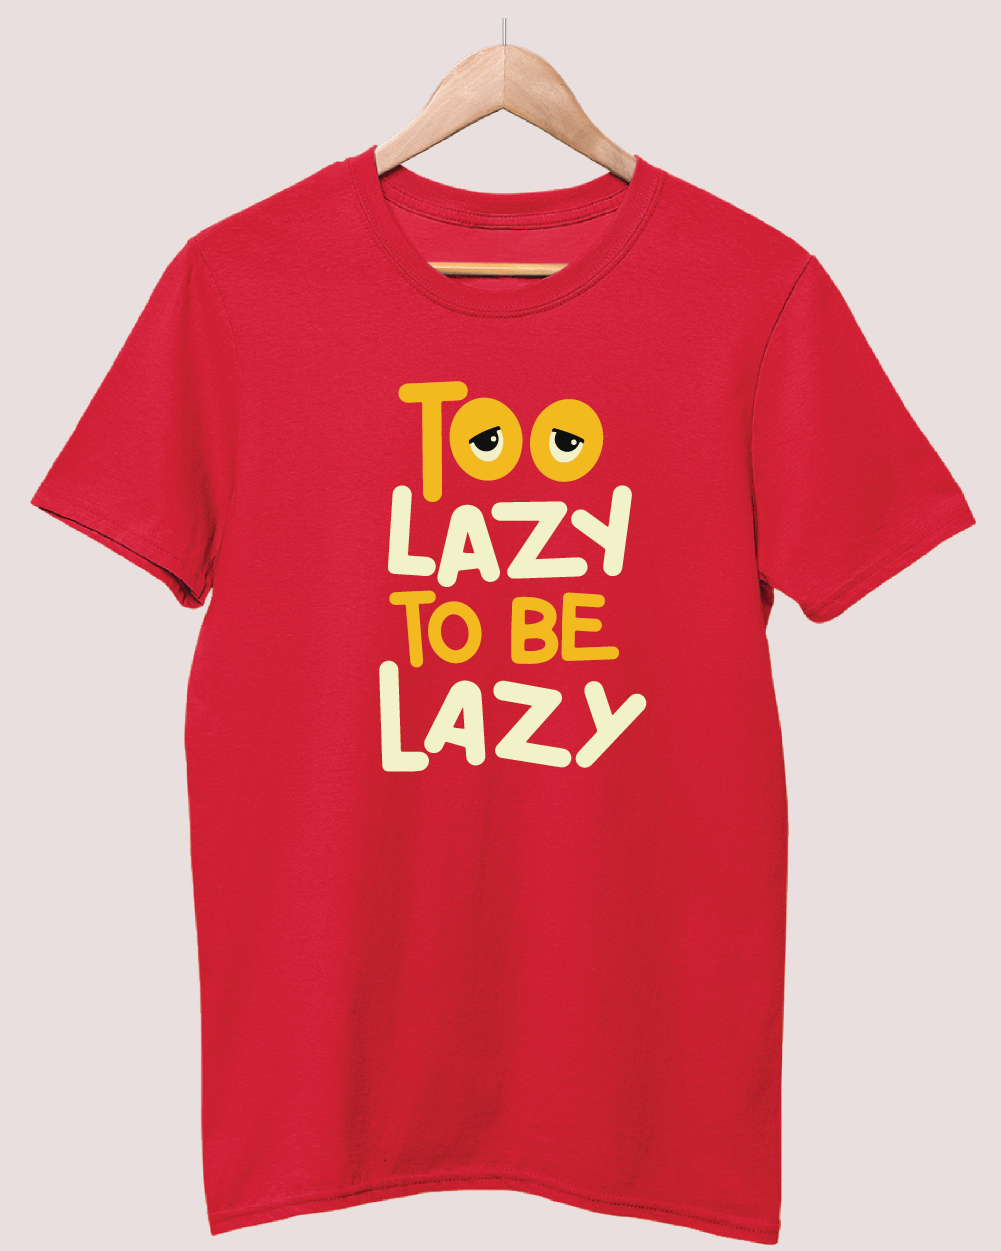 Too Lazy to be Lazy t-shirt